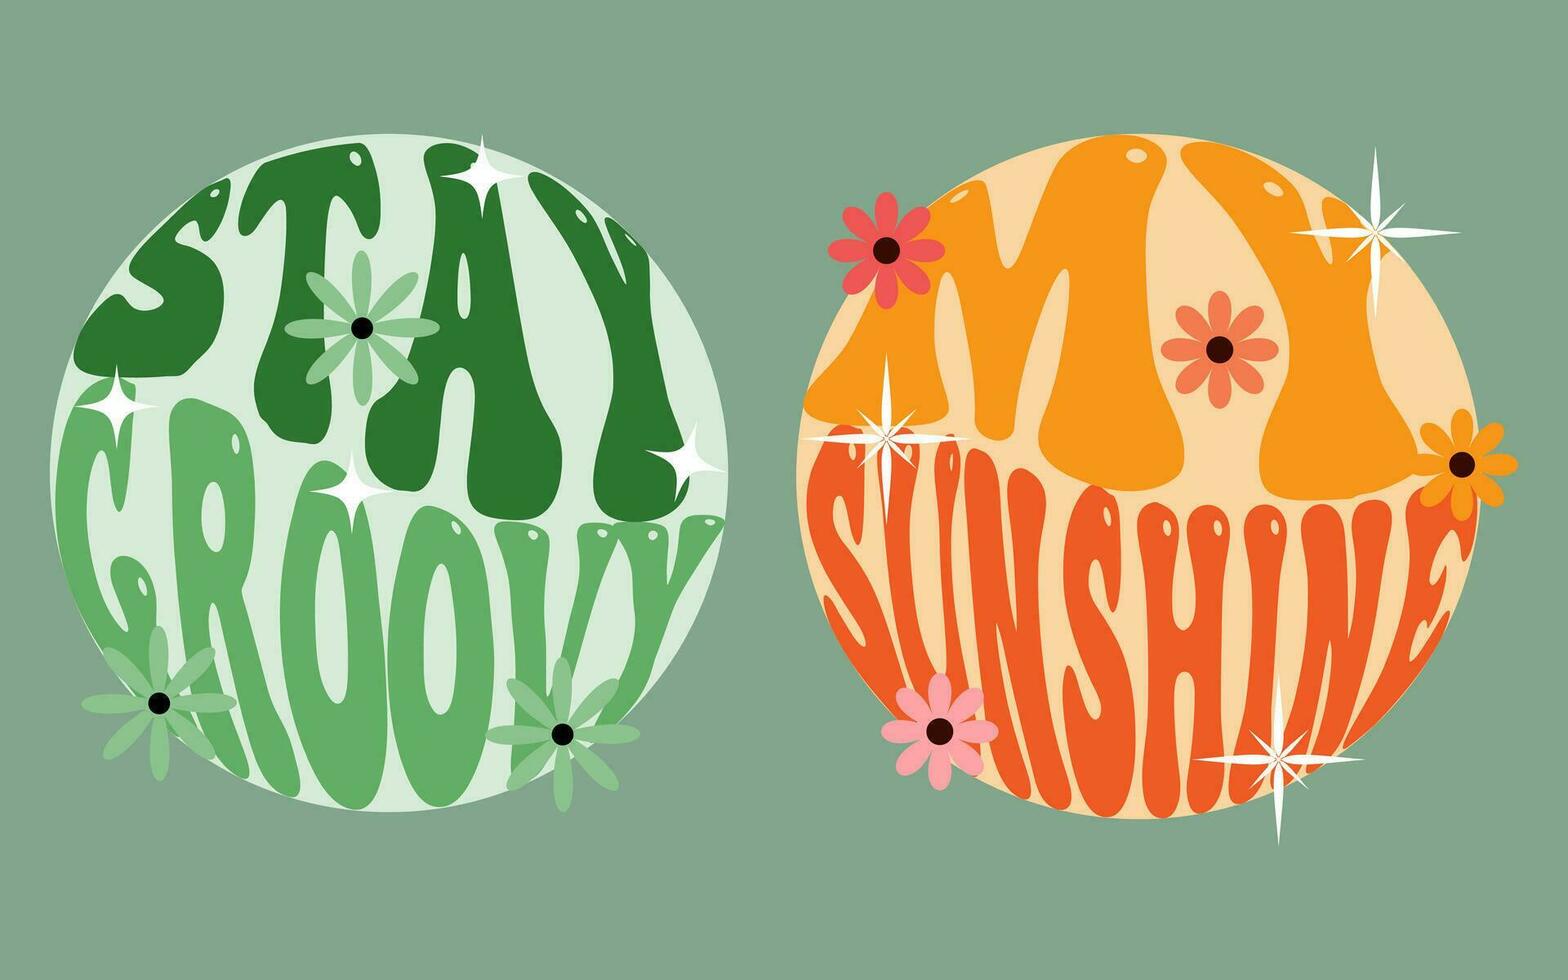 70s retro groovy text stay groovy, my sunshine, groovy text set in green and orange colors. vector